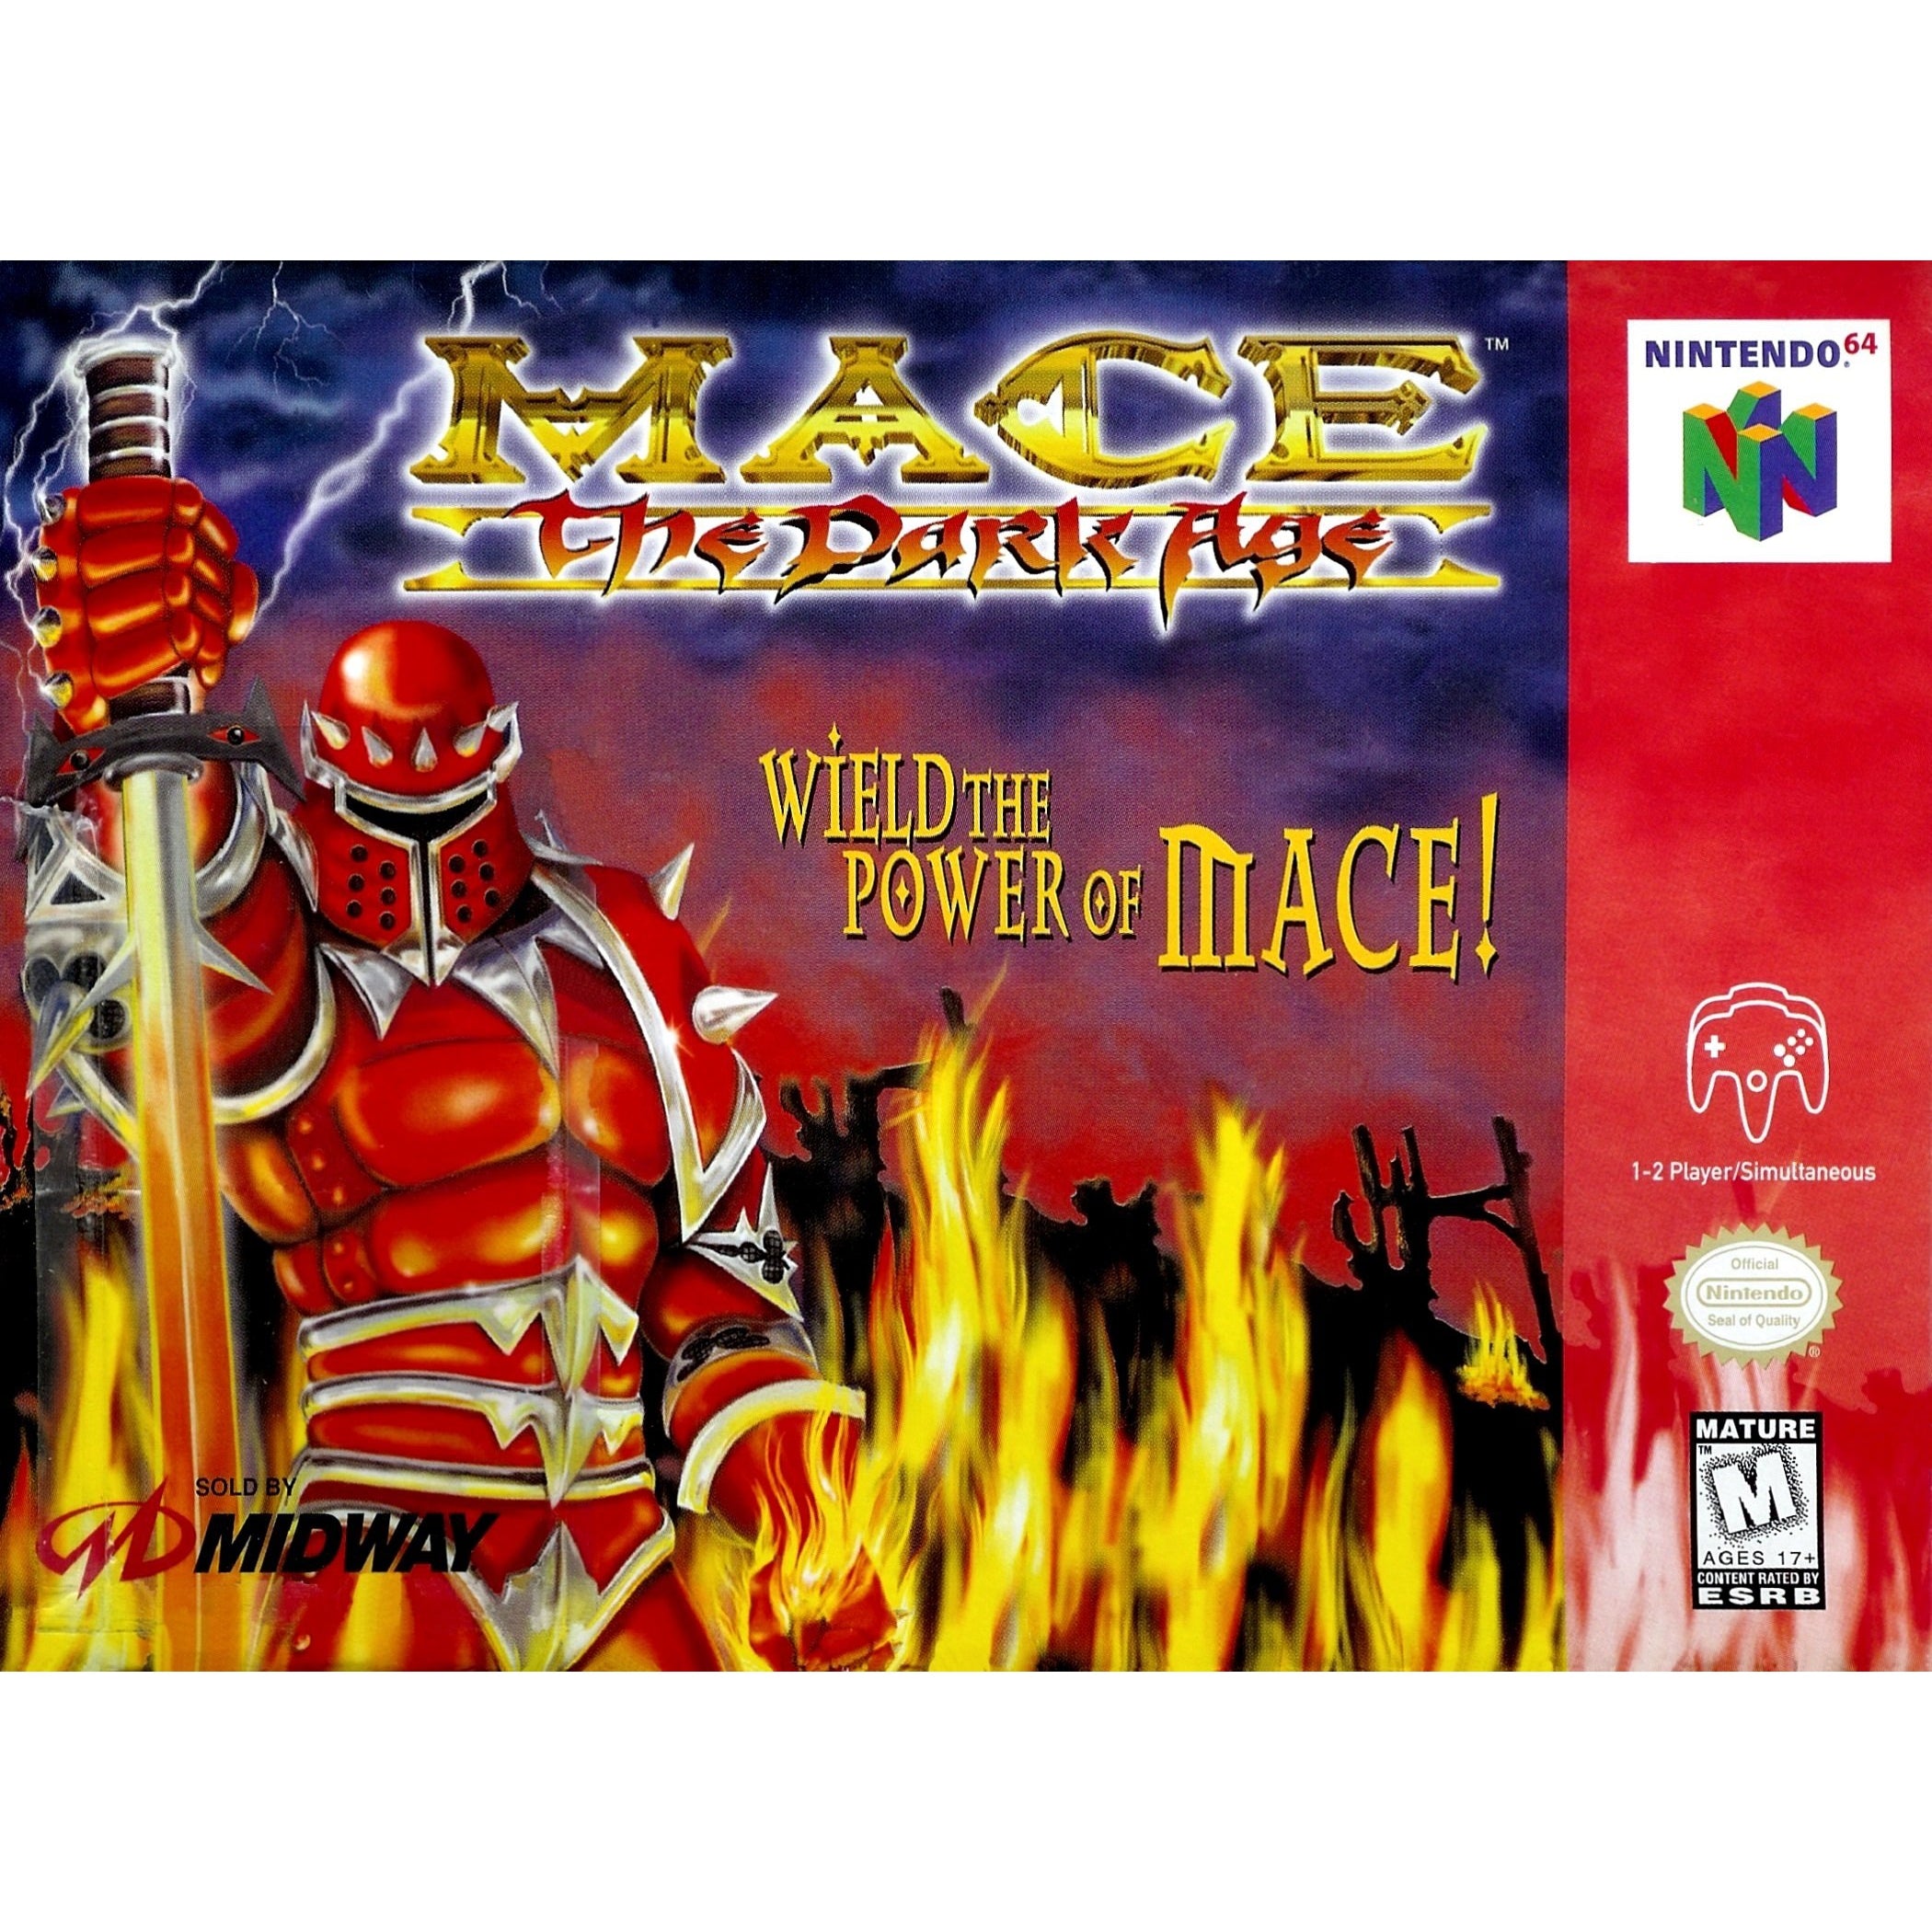 Mace: The Dark Age - Authentic Nintendo 64 (N64) Game Cartridge - YourGamingShop.com - Buy, Sell, Trade Video Games Online. 120 Day Warranty. Satisfaction Guaranteed.